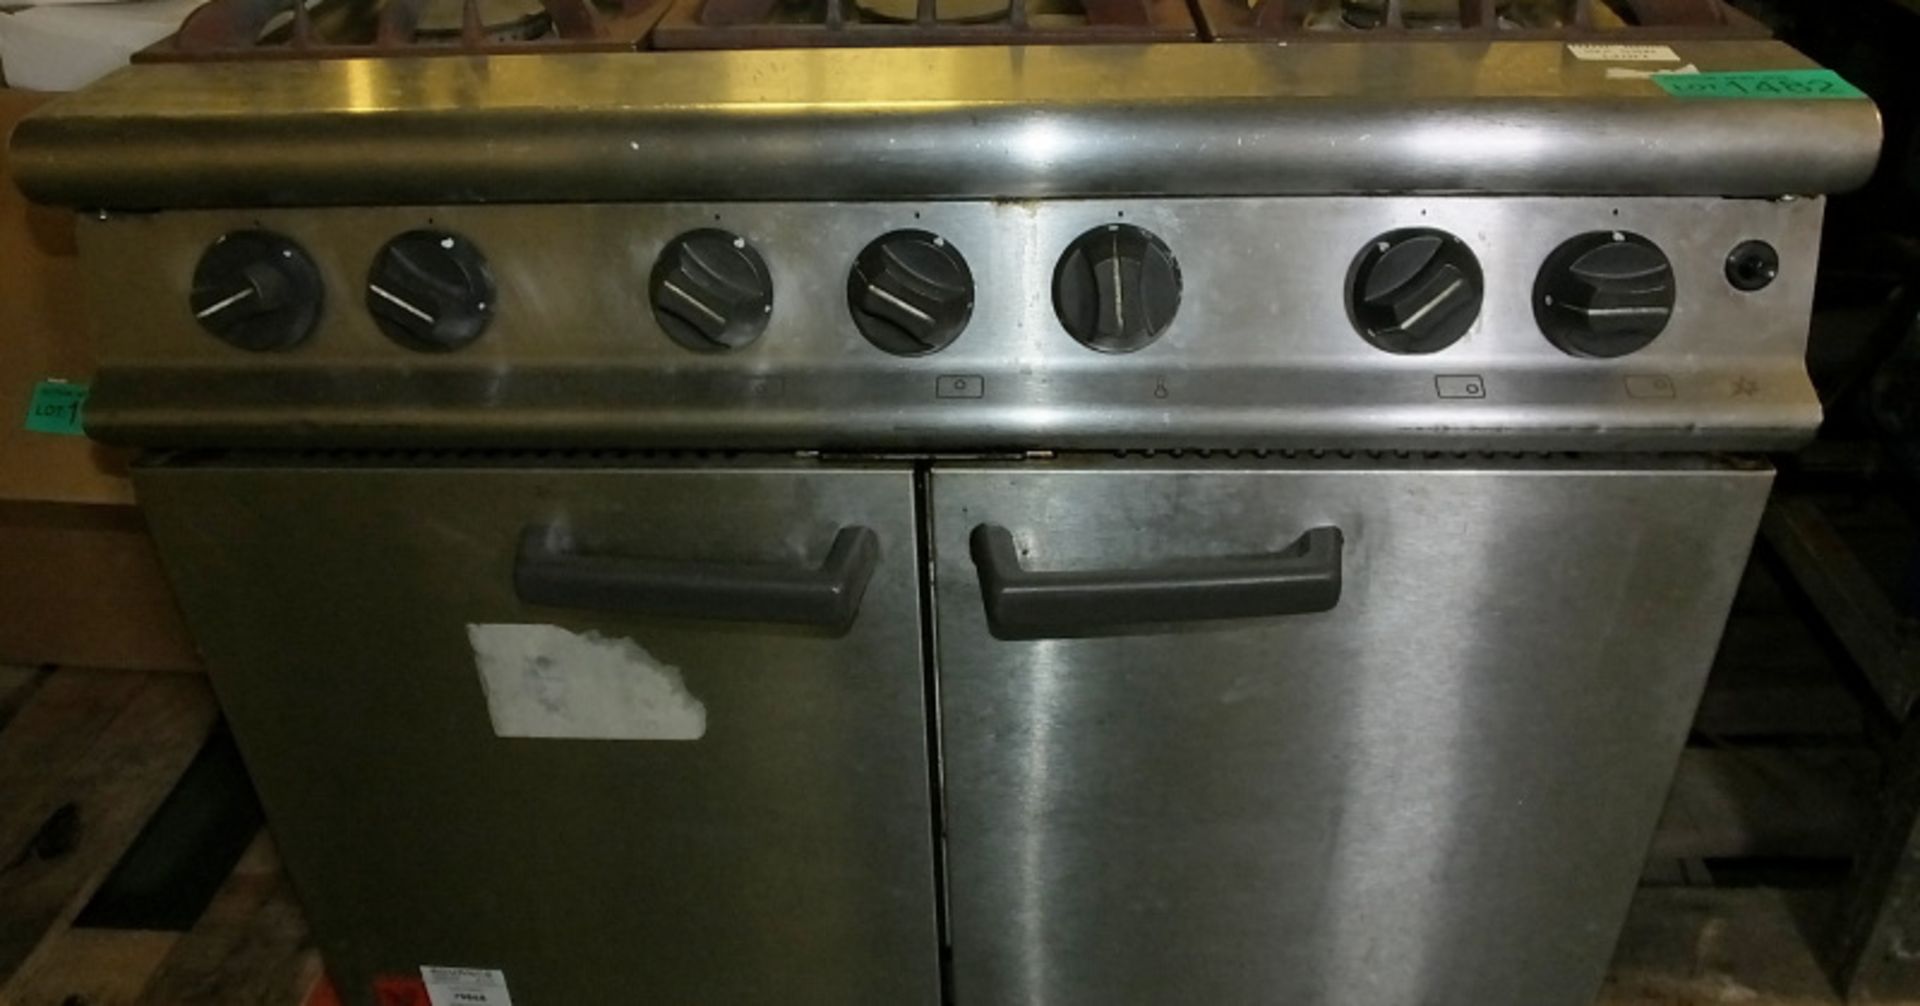 Falcon G3101 6 Burner & Oven - Gas L 900mm x W 940mm x H 900mm - Image 3 of 5